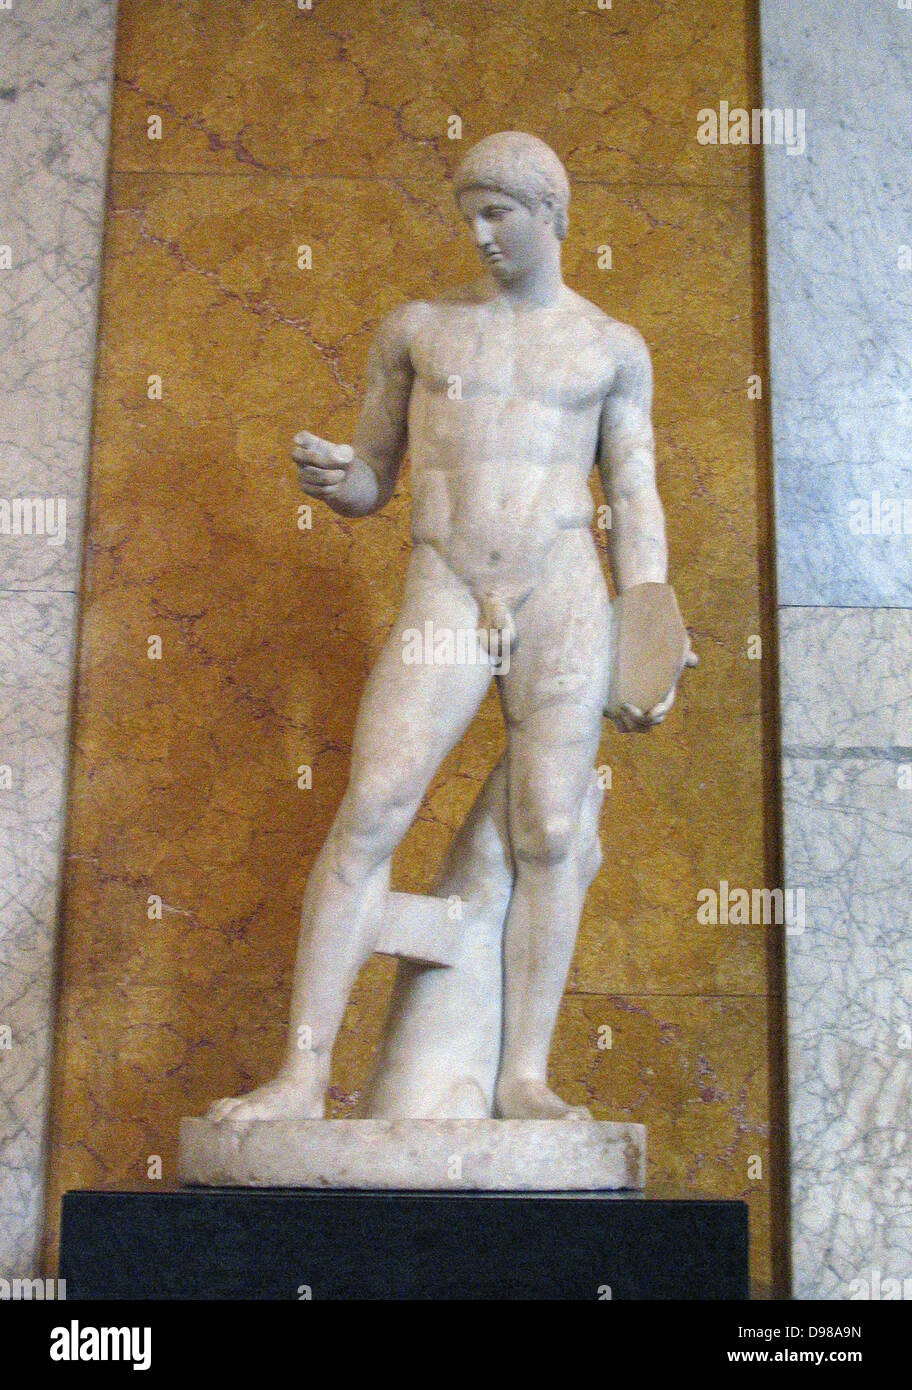 Discophoros, Marble Sculpture from British Museum.The Discophoros, also spelled Discophorus, was a bronze sculpture by the classical Greek sculptor Polyclitus, creator of the Doryphoros and Diadumenos, and its many Roman marble copies. Like the Doryphoros and Diadumenos, it was created as an example of Polyclitus's 'canon' of the ideal human form in sculpture. Stock Photo